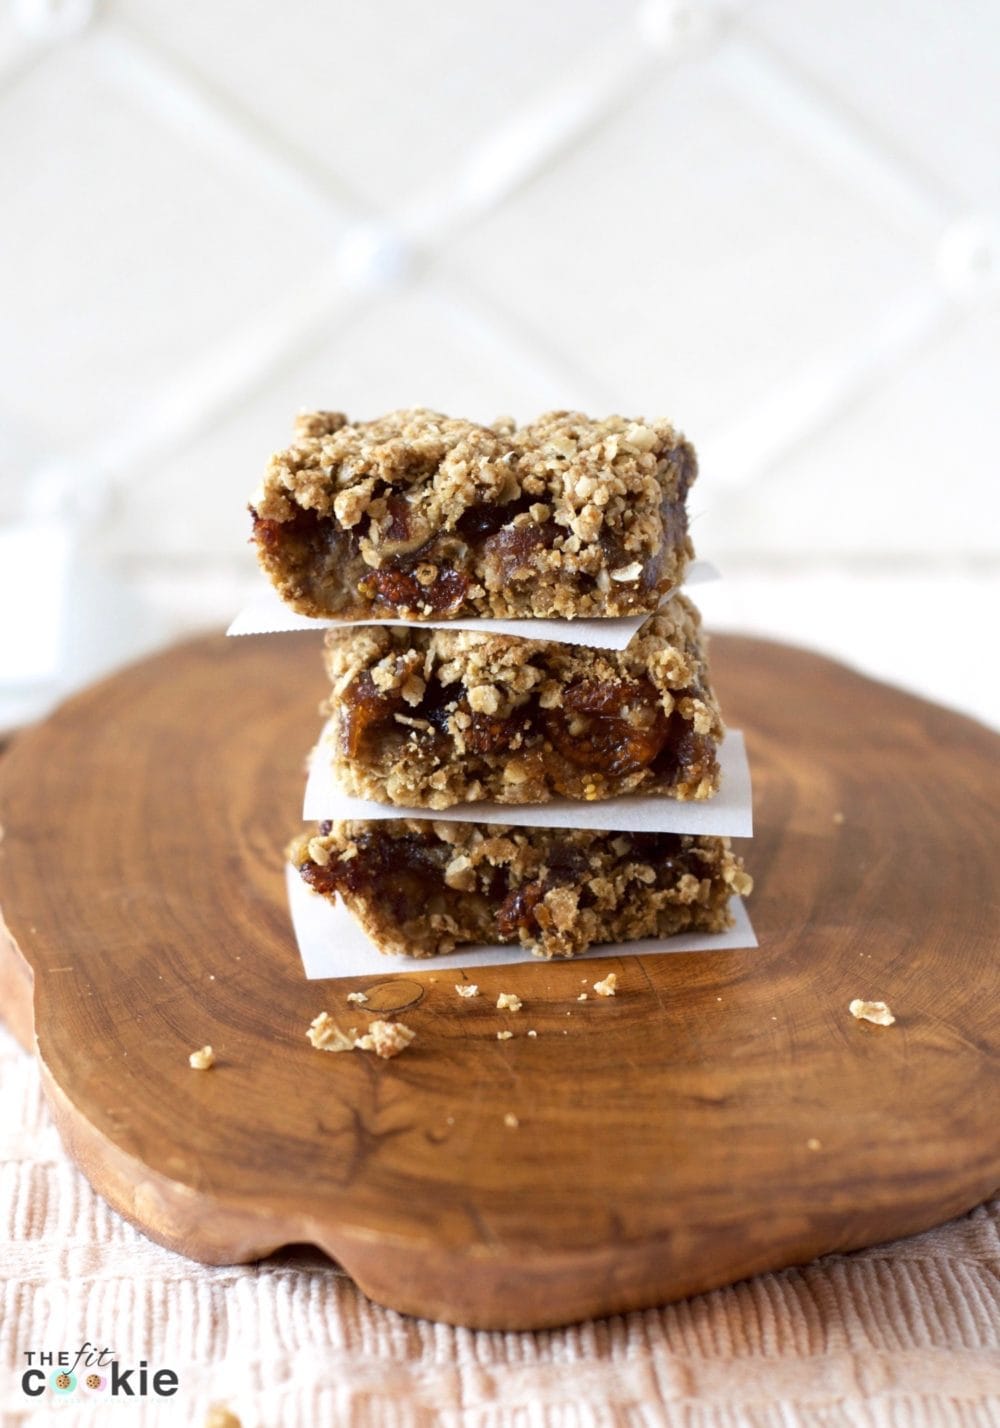 Golden Berry Date Bars are a delicious snack and dessert that's a bit lower in sugar than some traditional date bars, plus these are gluten free, vegan, and peanut free!  - @thefitcookie #glutenfree #vegan #recipe 